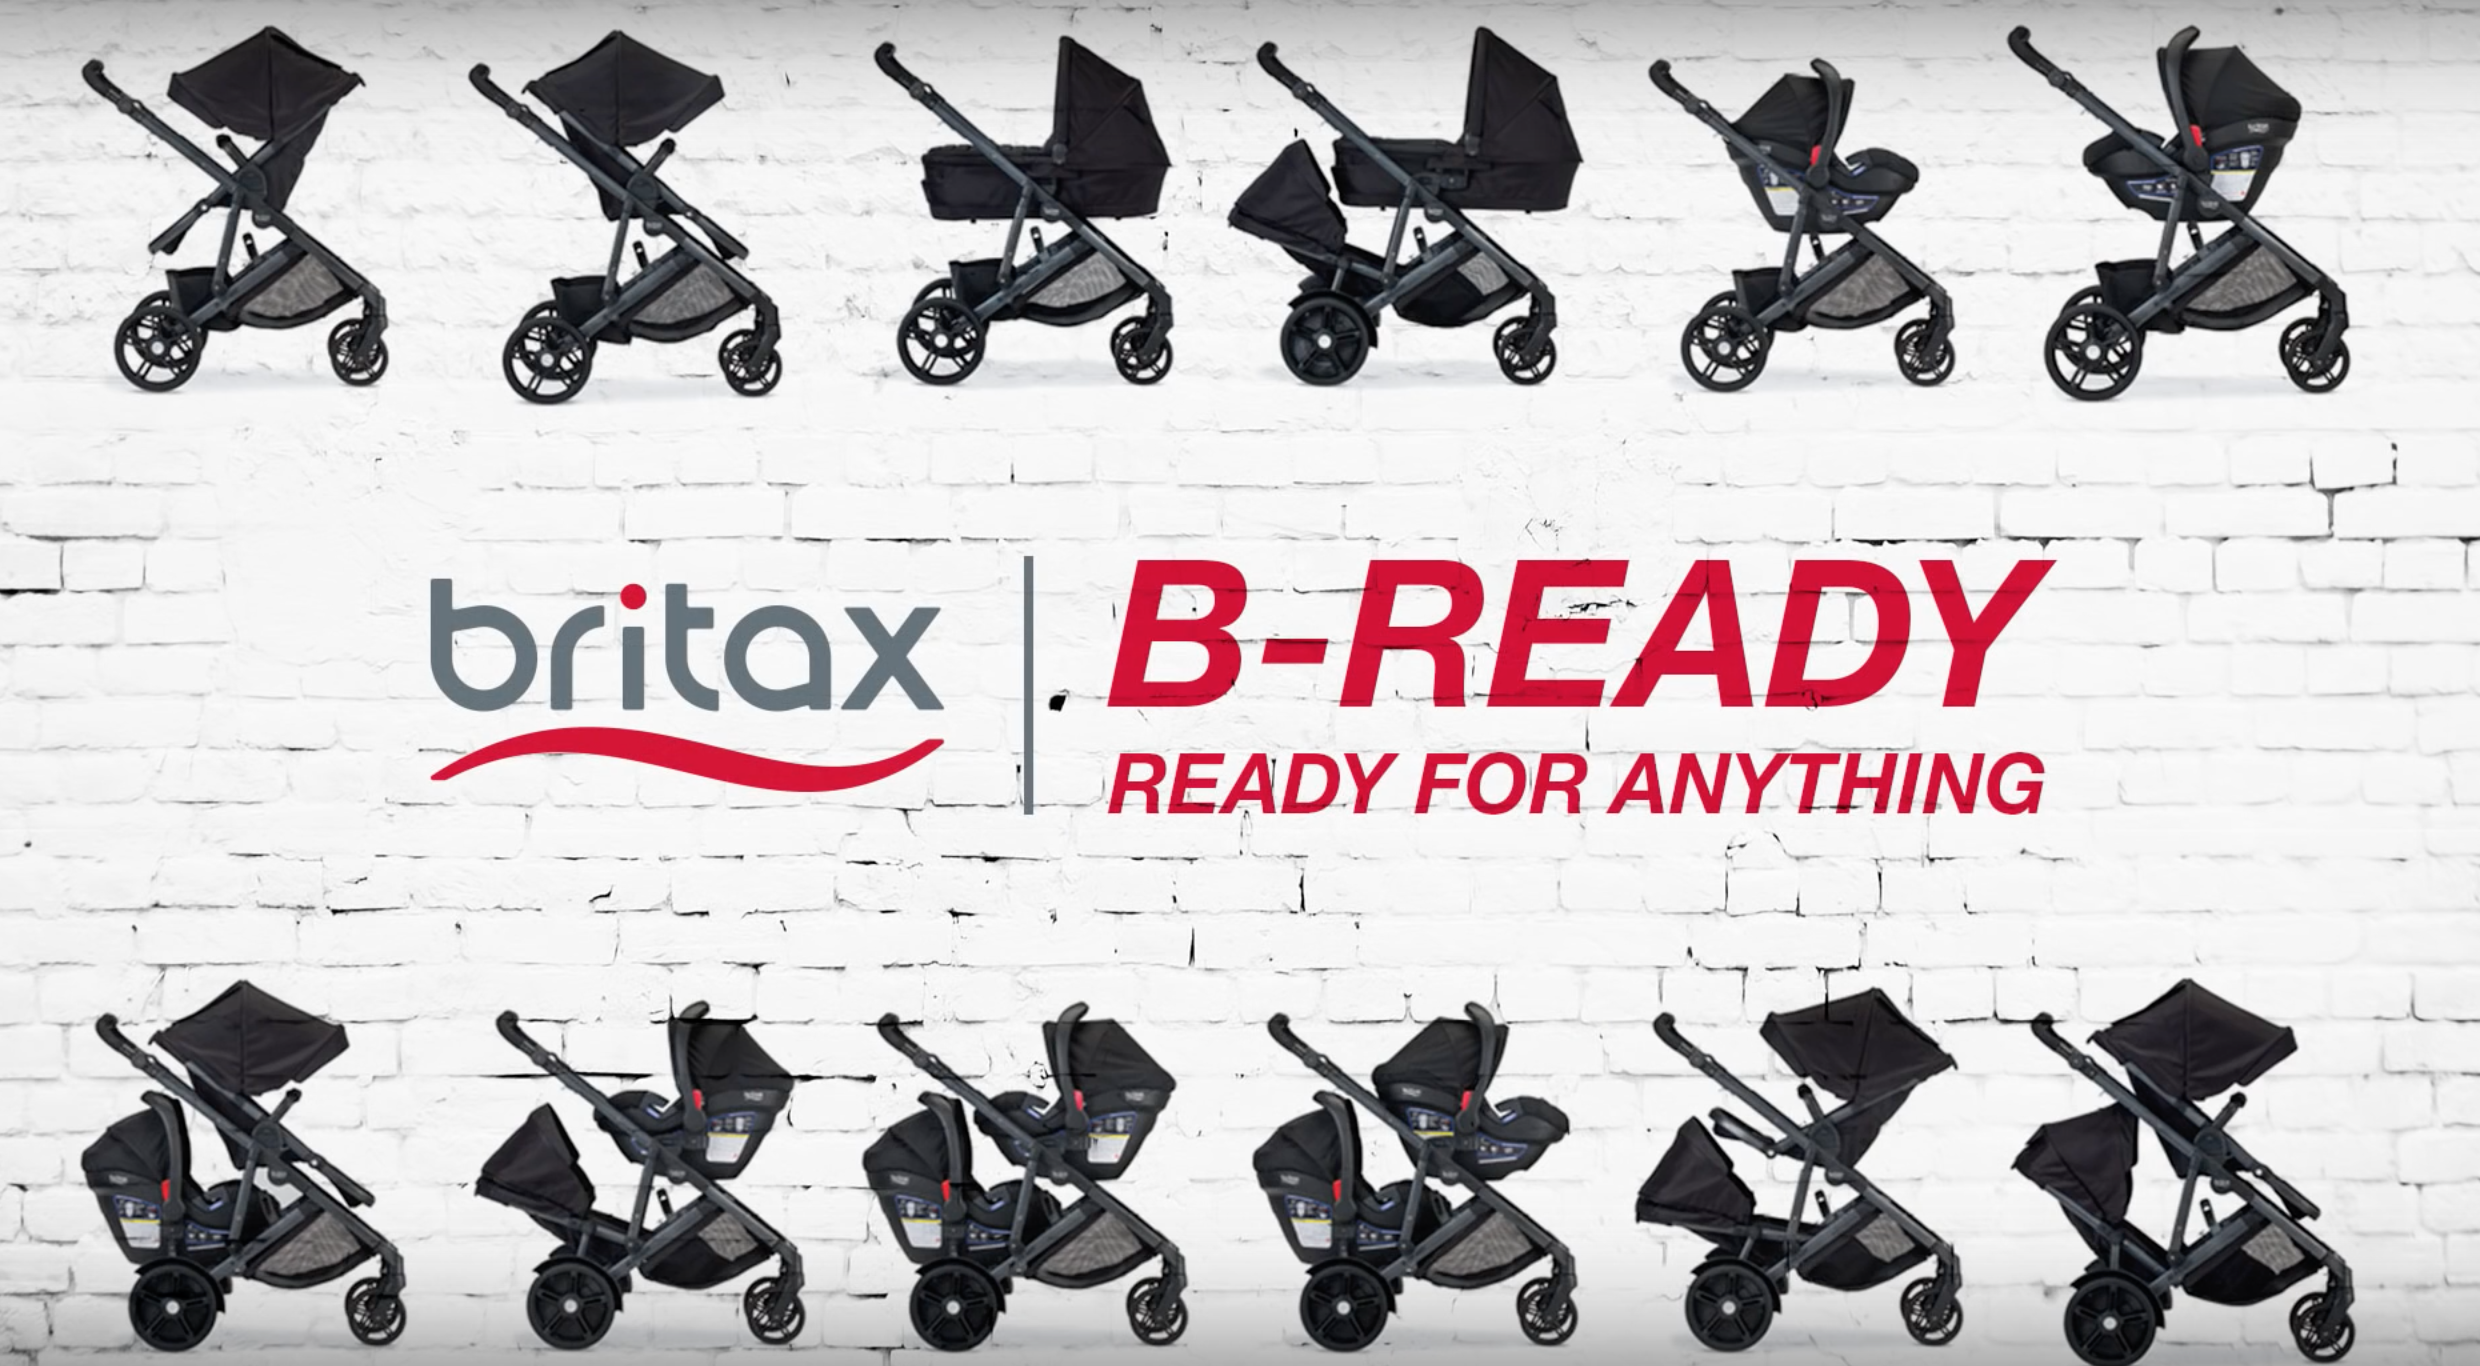 What's New About the 2017 Britax B-Ready Stroller